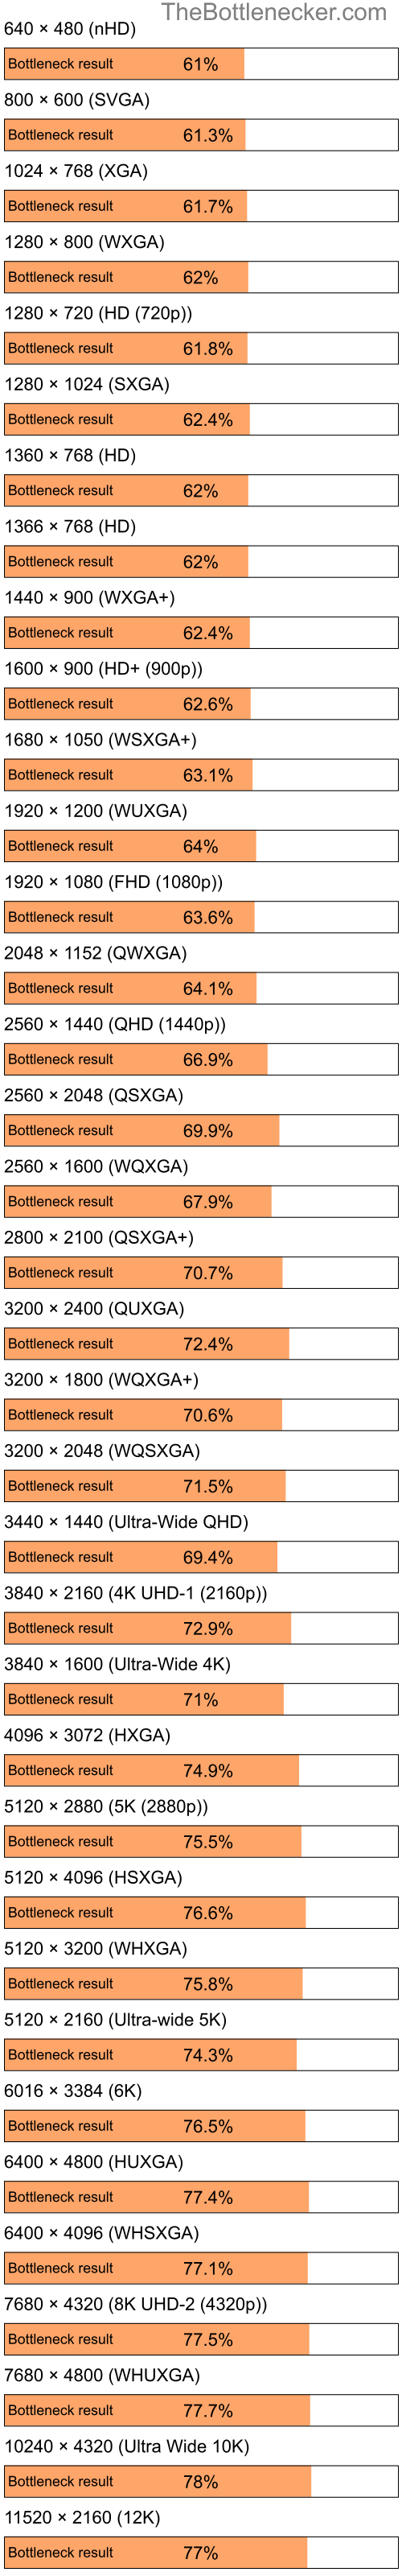 Bottleneck results by resolution for Intel Celeron M 410 and AMD Mobility Radeon HD 4250 in General Tasks